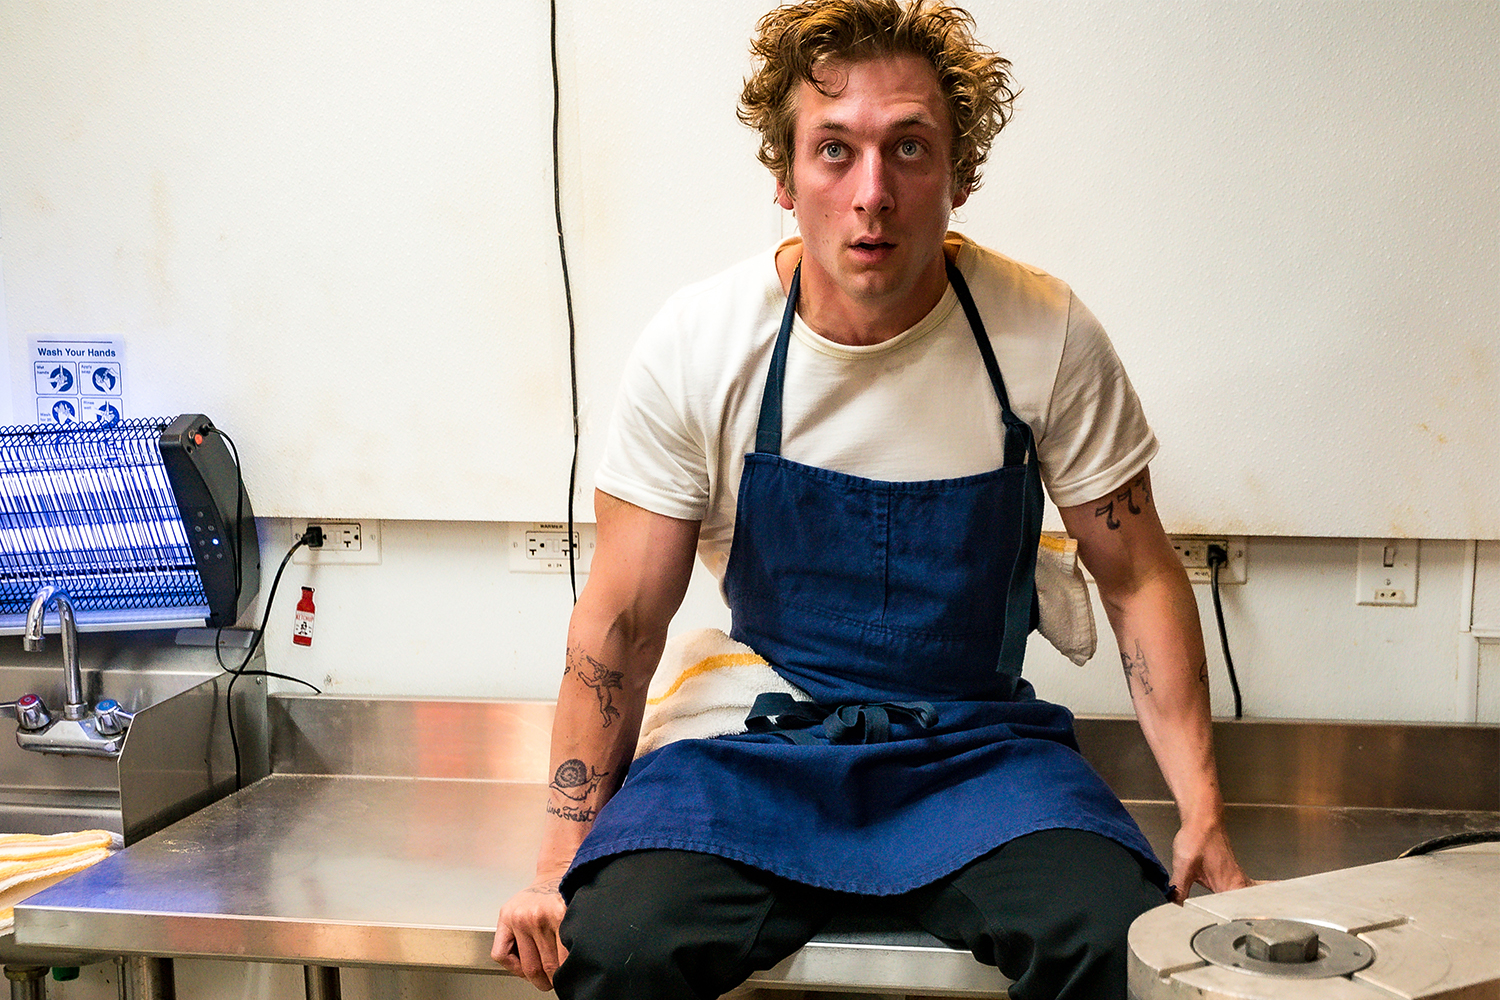 Actor Jeremy Allen White as Carmy in FX's hit restaurant show "The Bear"